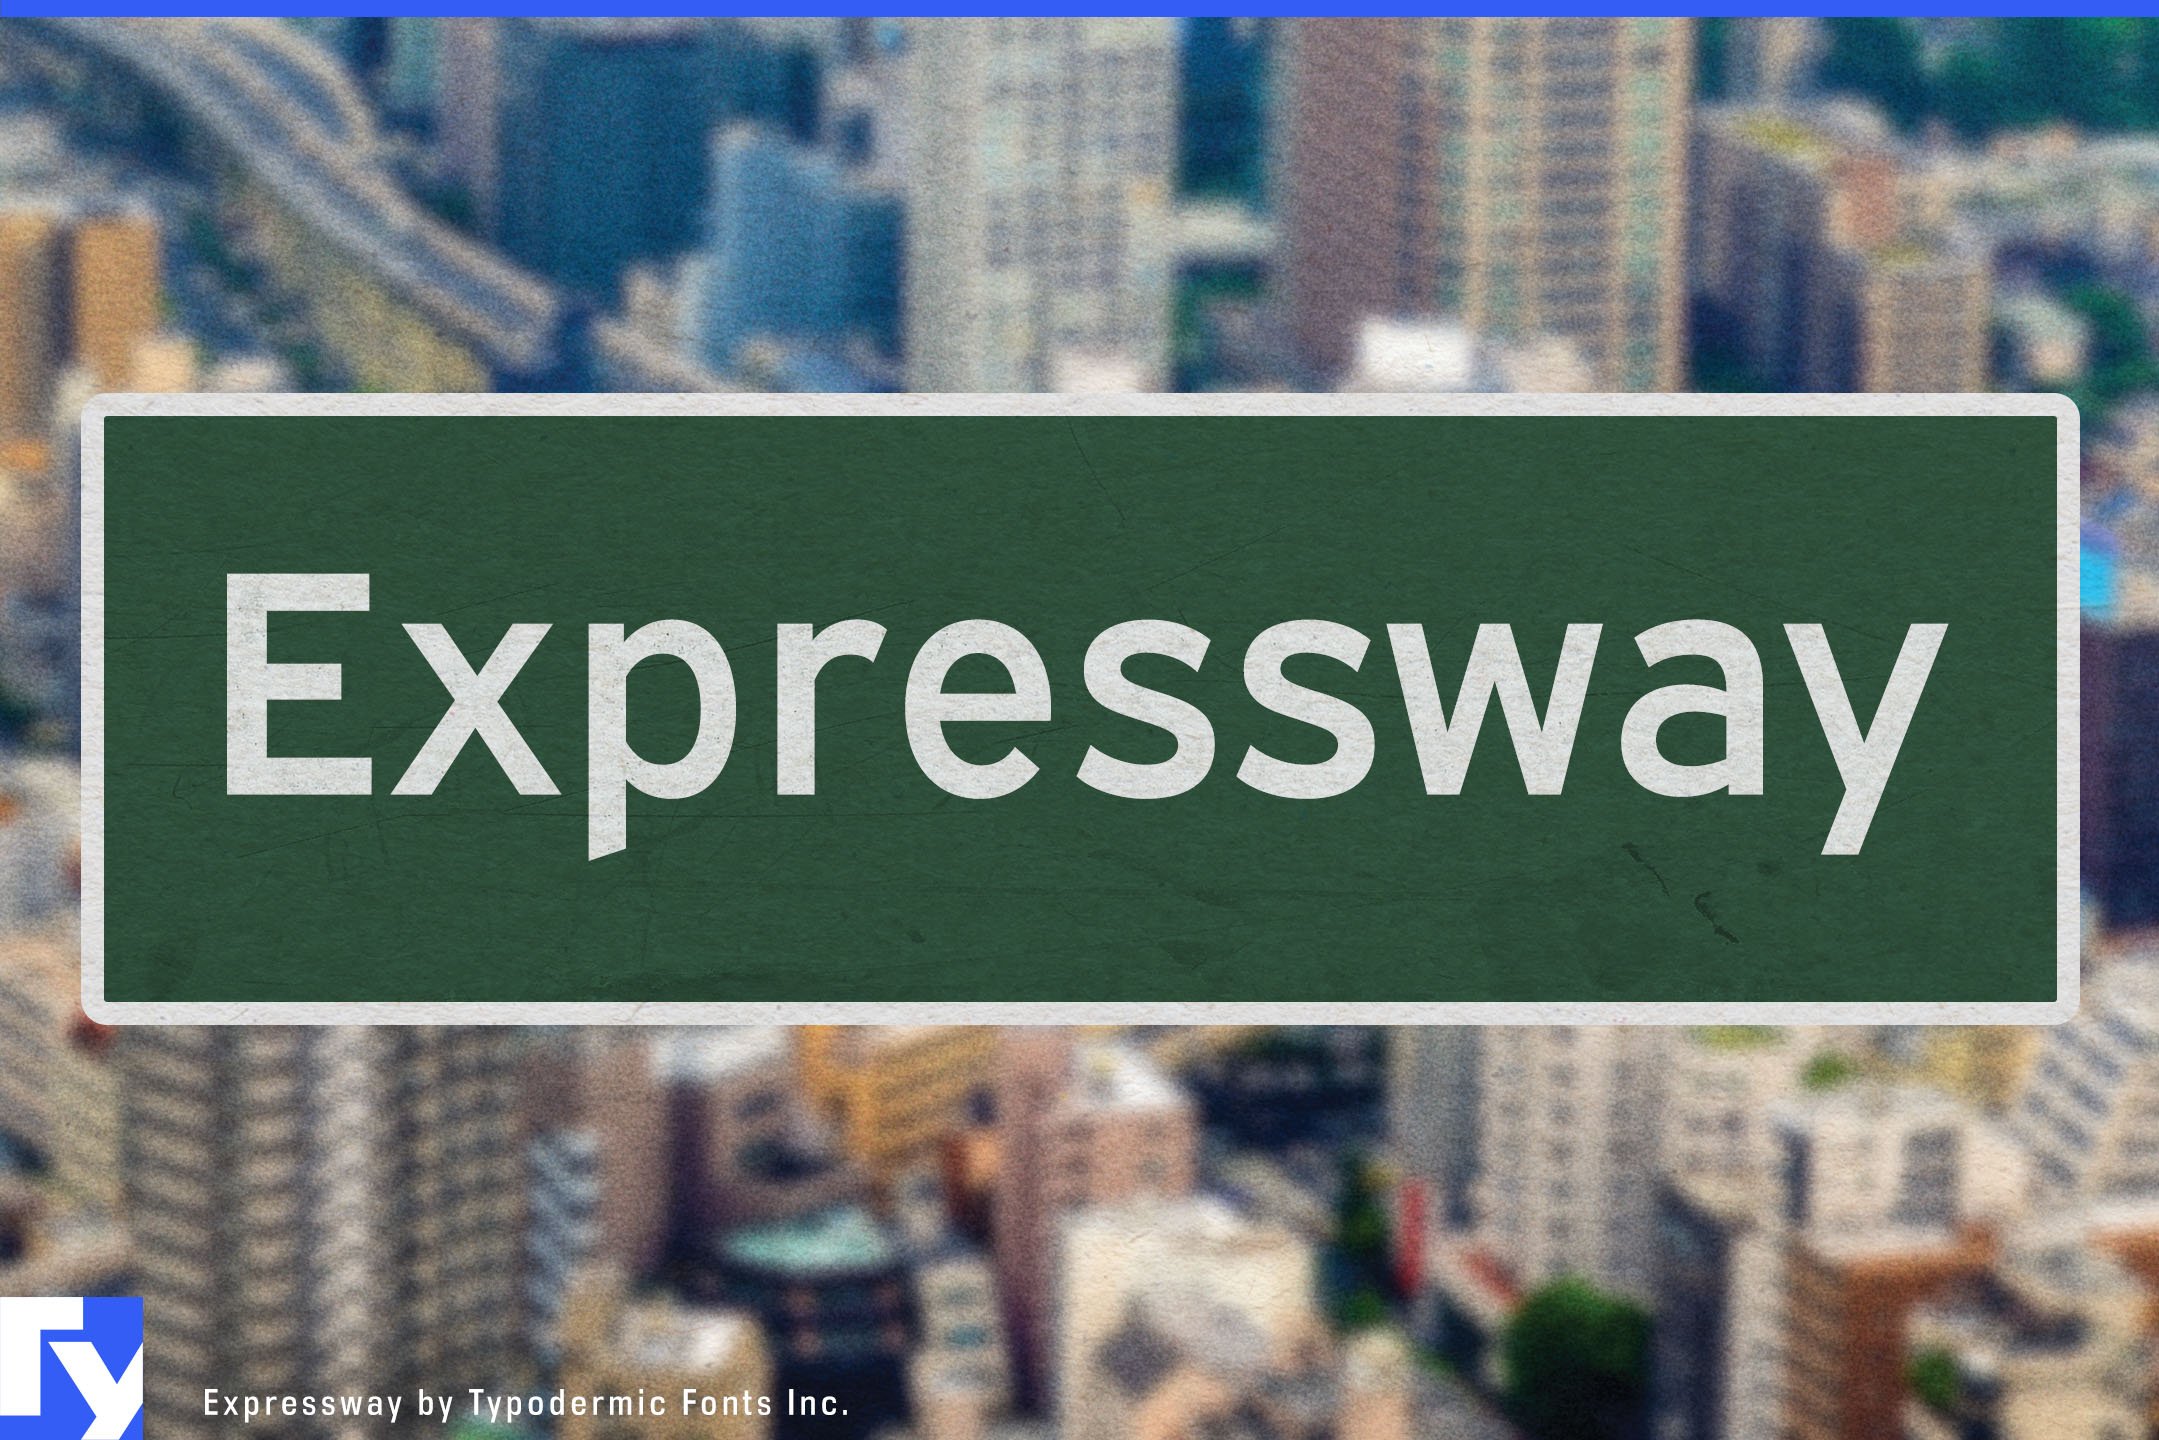 Expressway cover image.